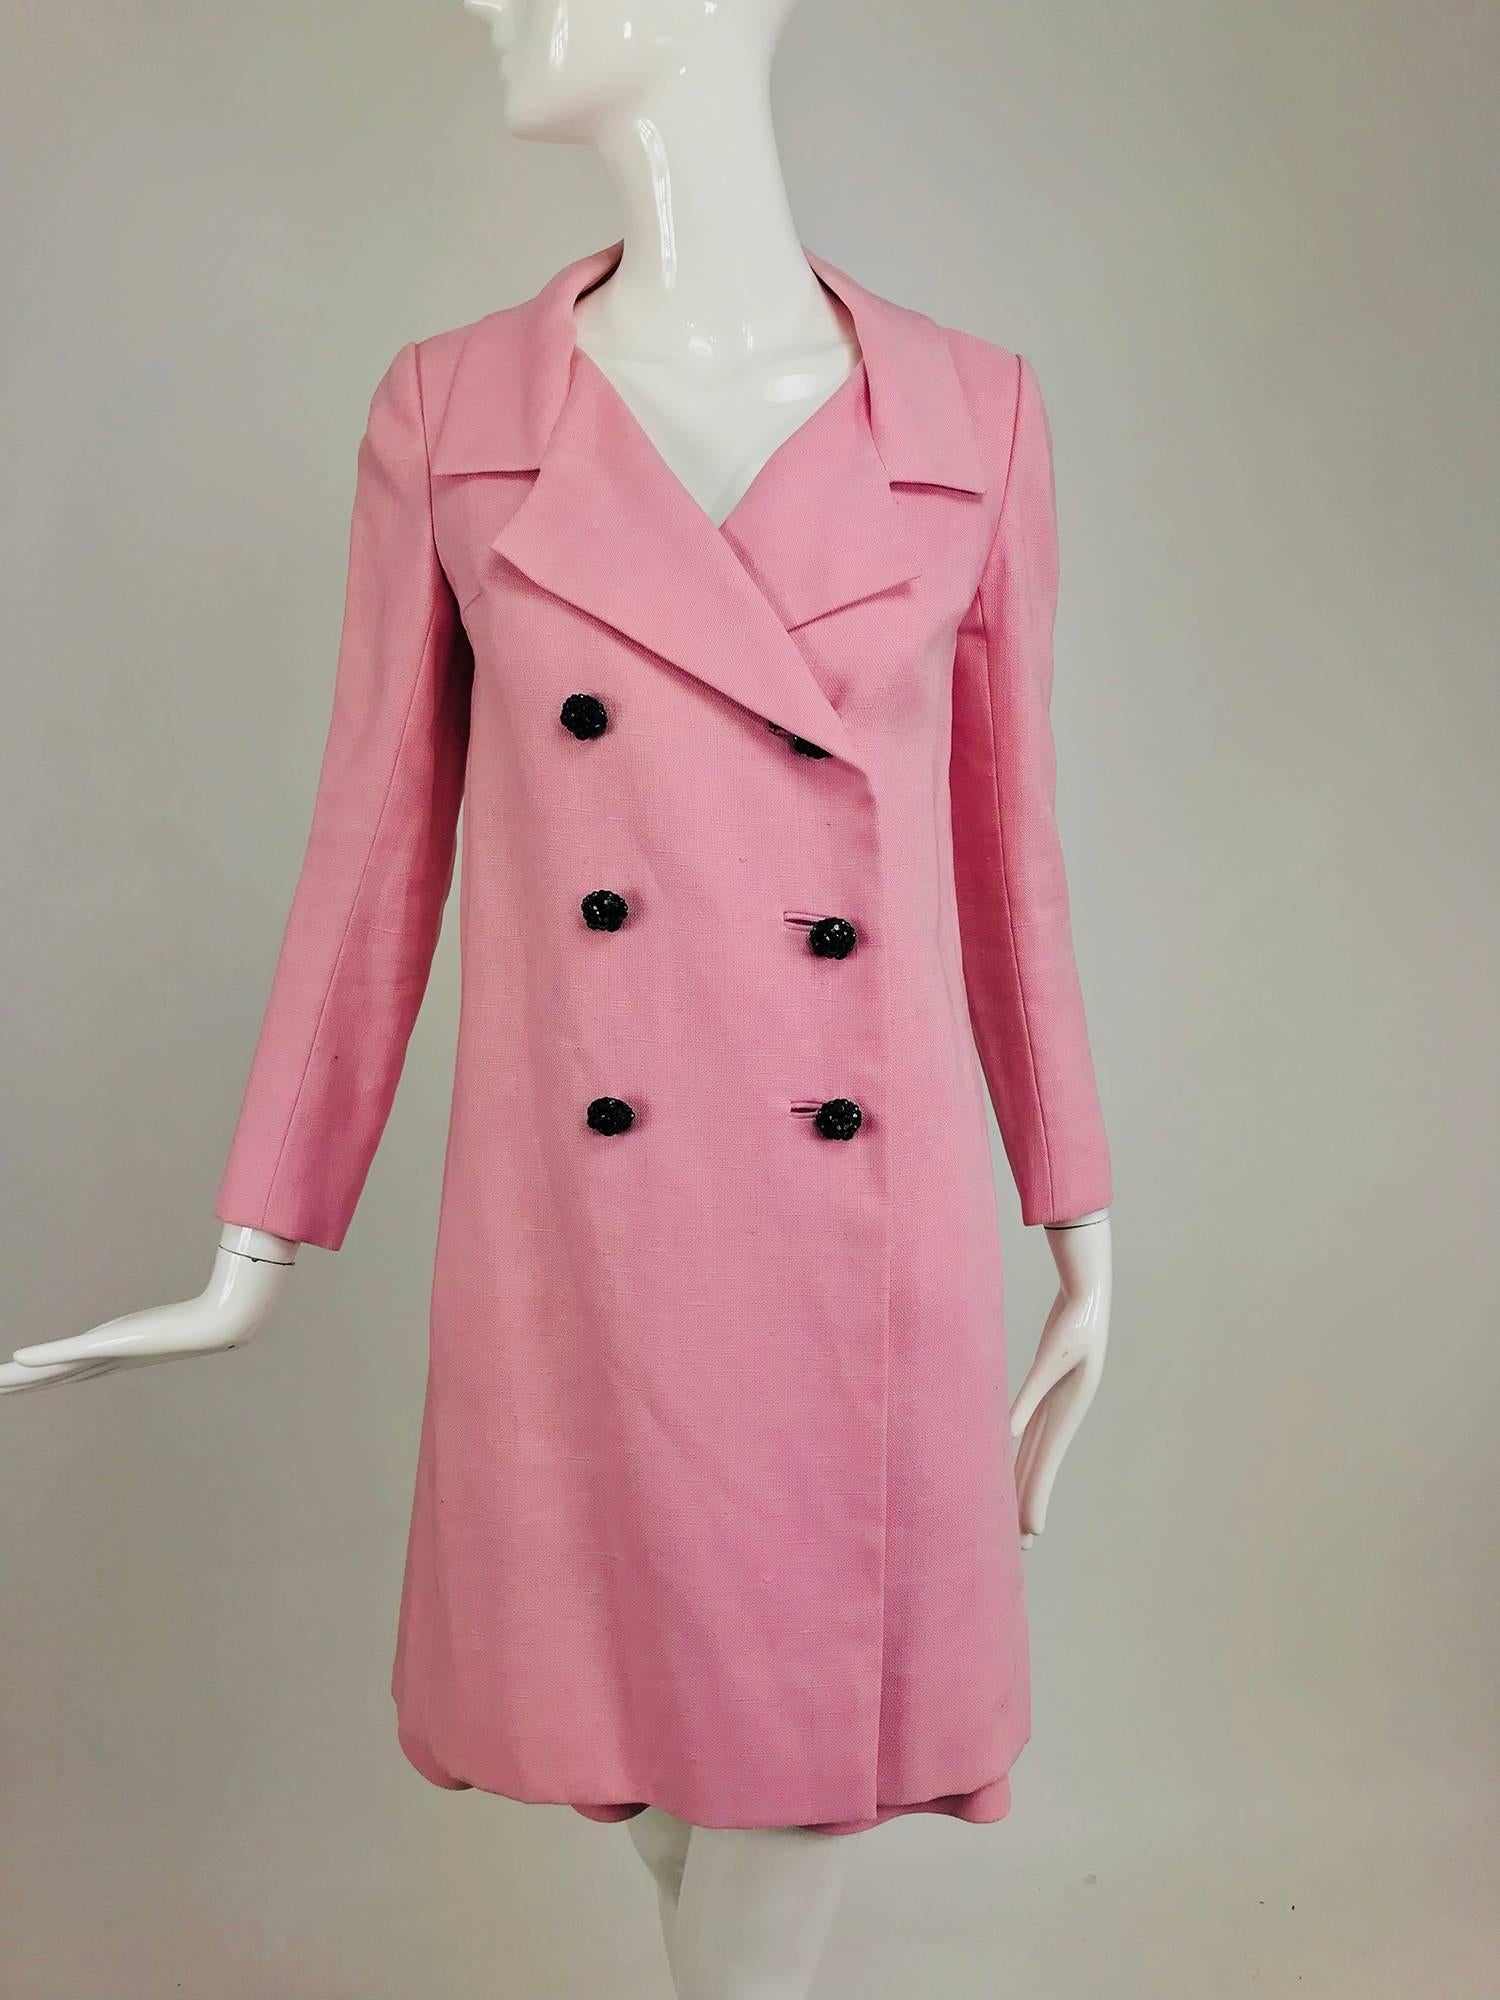 A Junior Sophisticates Original black paillette and pink linen dress and coat set from the 1960s designed by Anne Klein. Junior Sophisticates was started in 1948 by husband and wife Ben and Anne Klein, sophisticated designs for petite women in